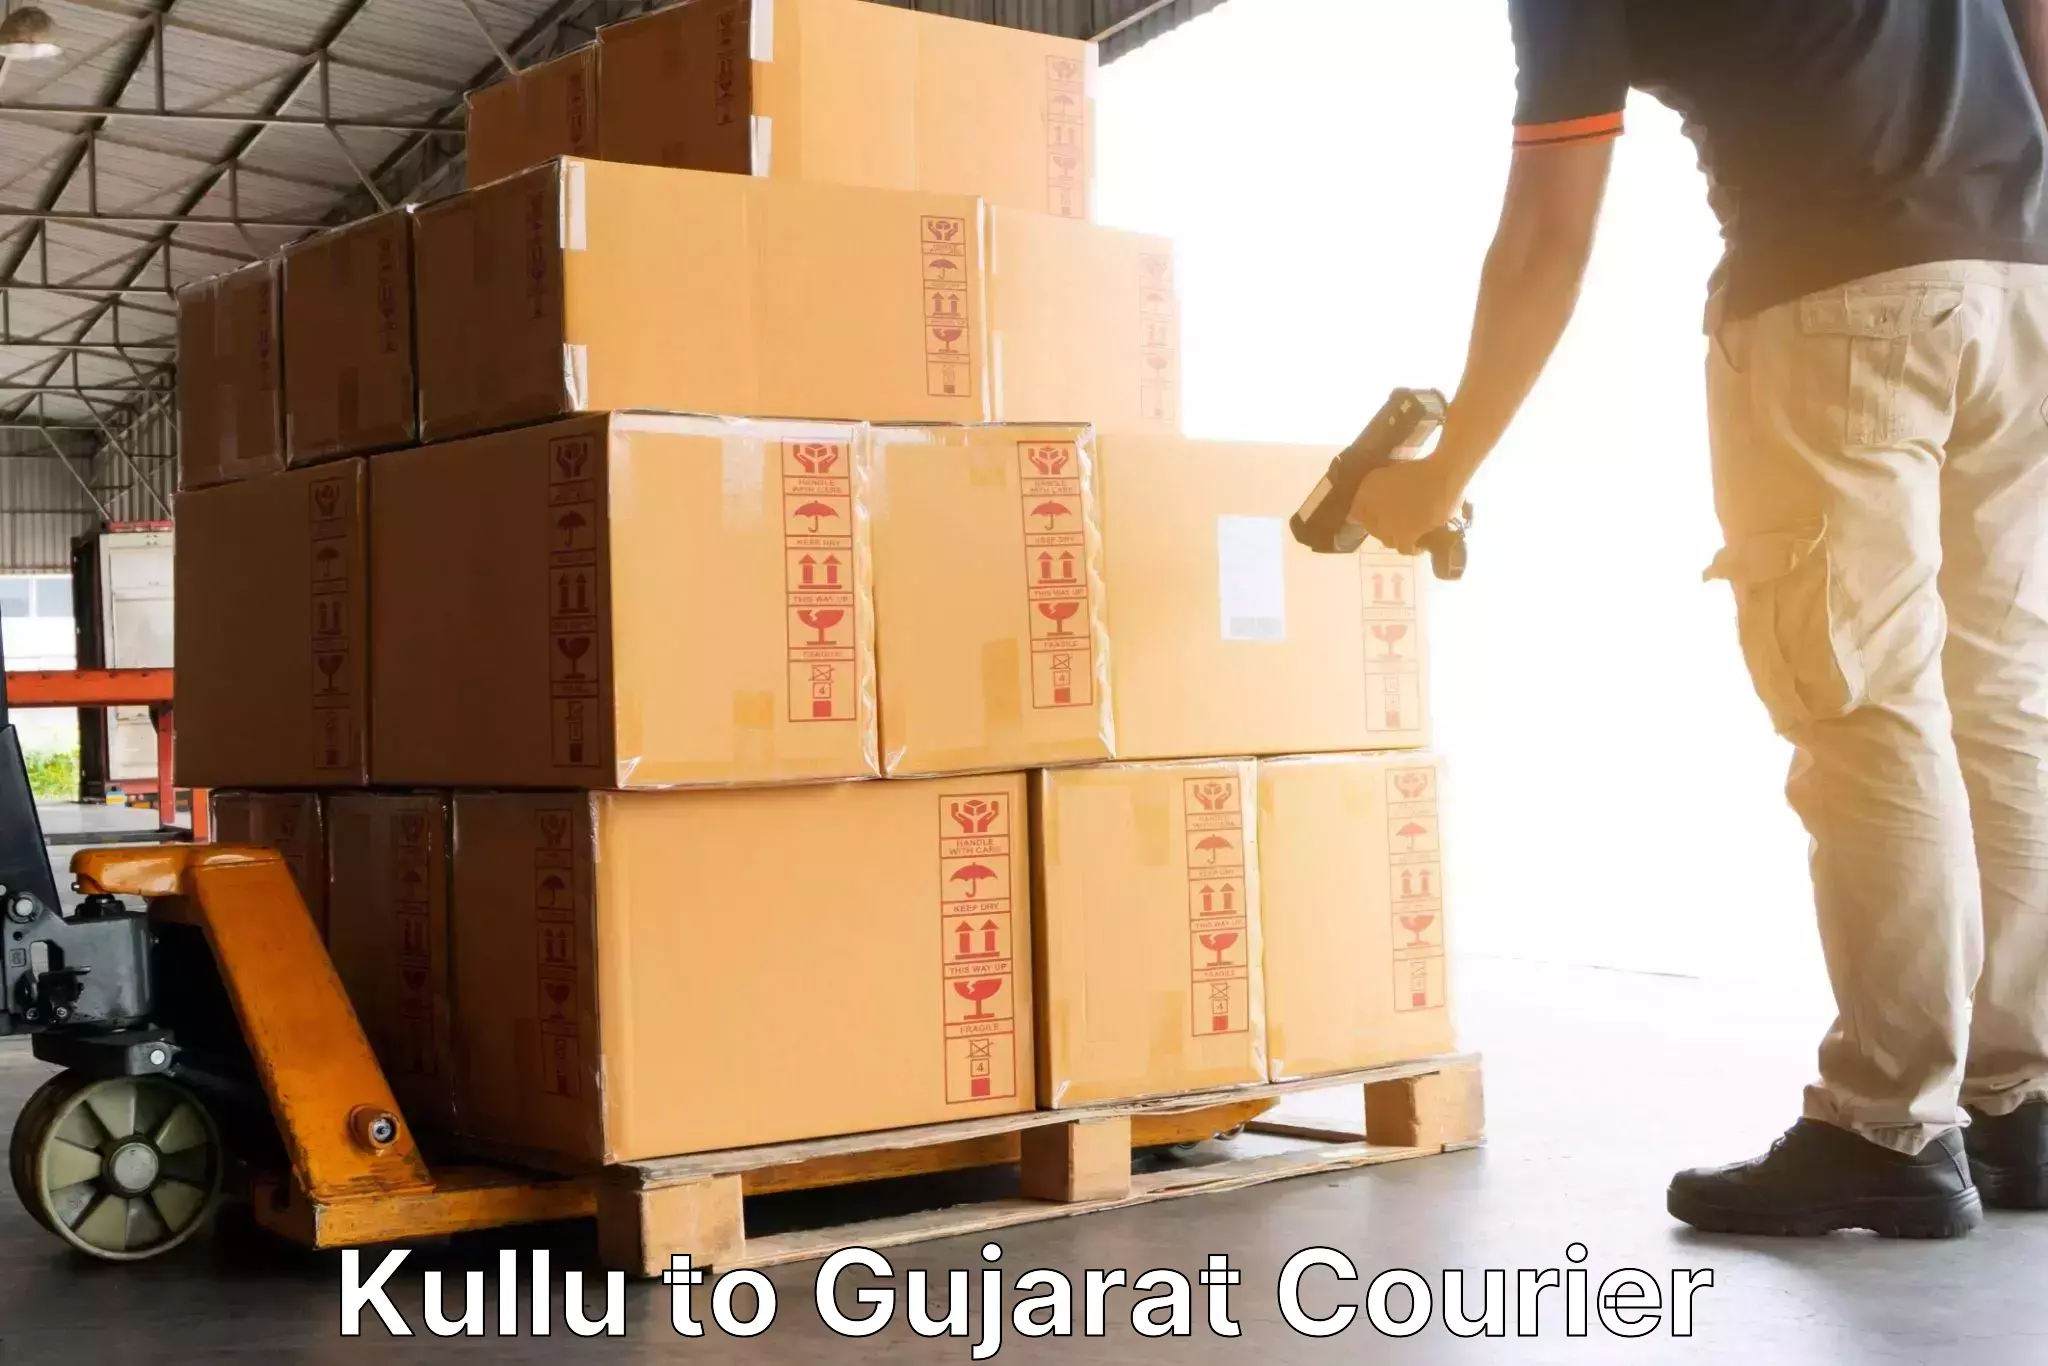 Reliable courier service Kullu to Gujarat